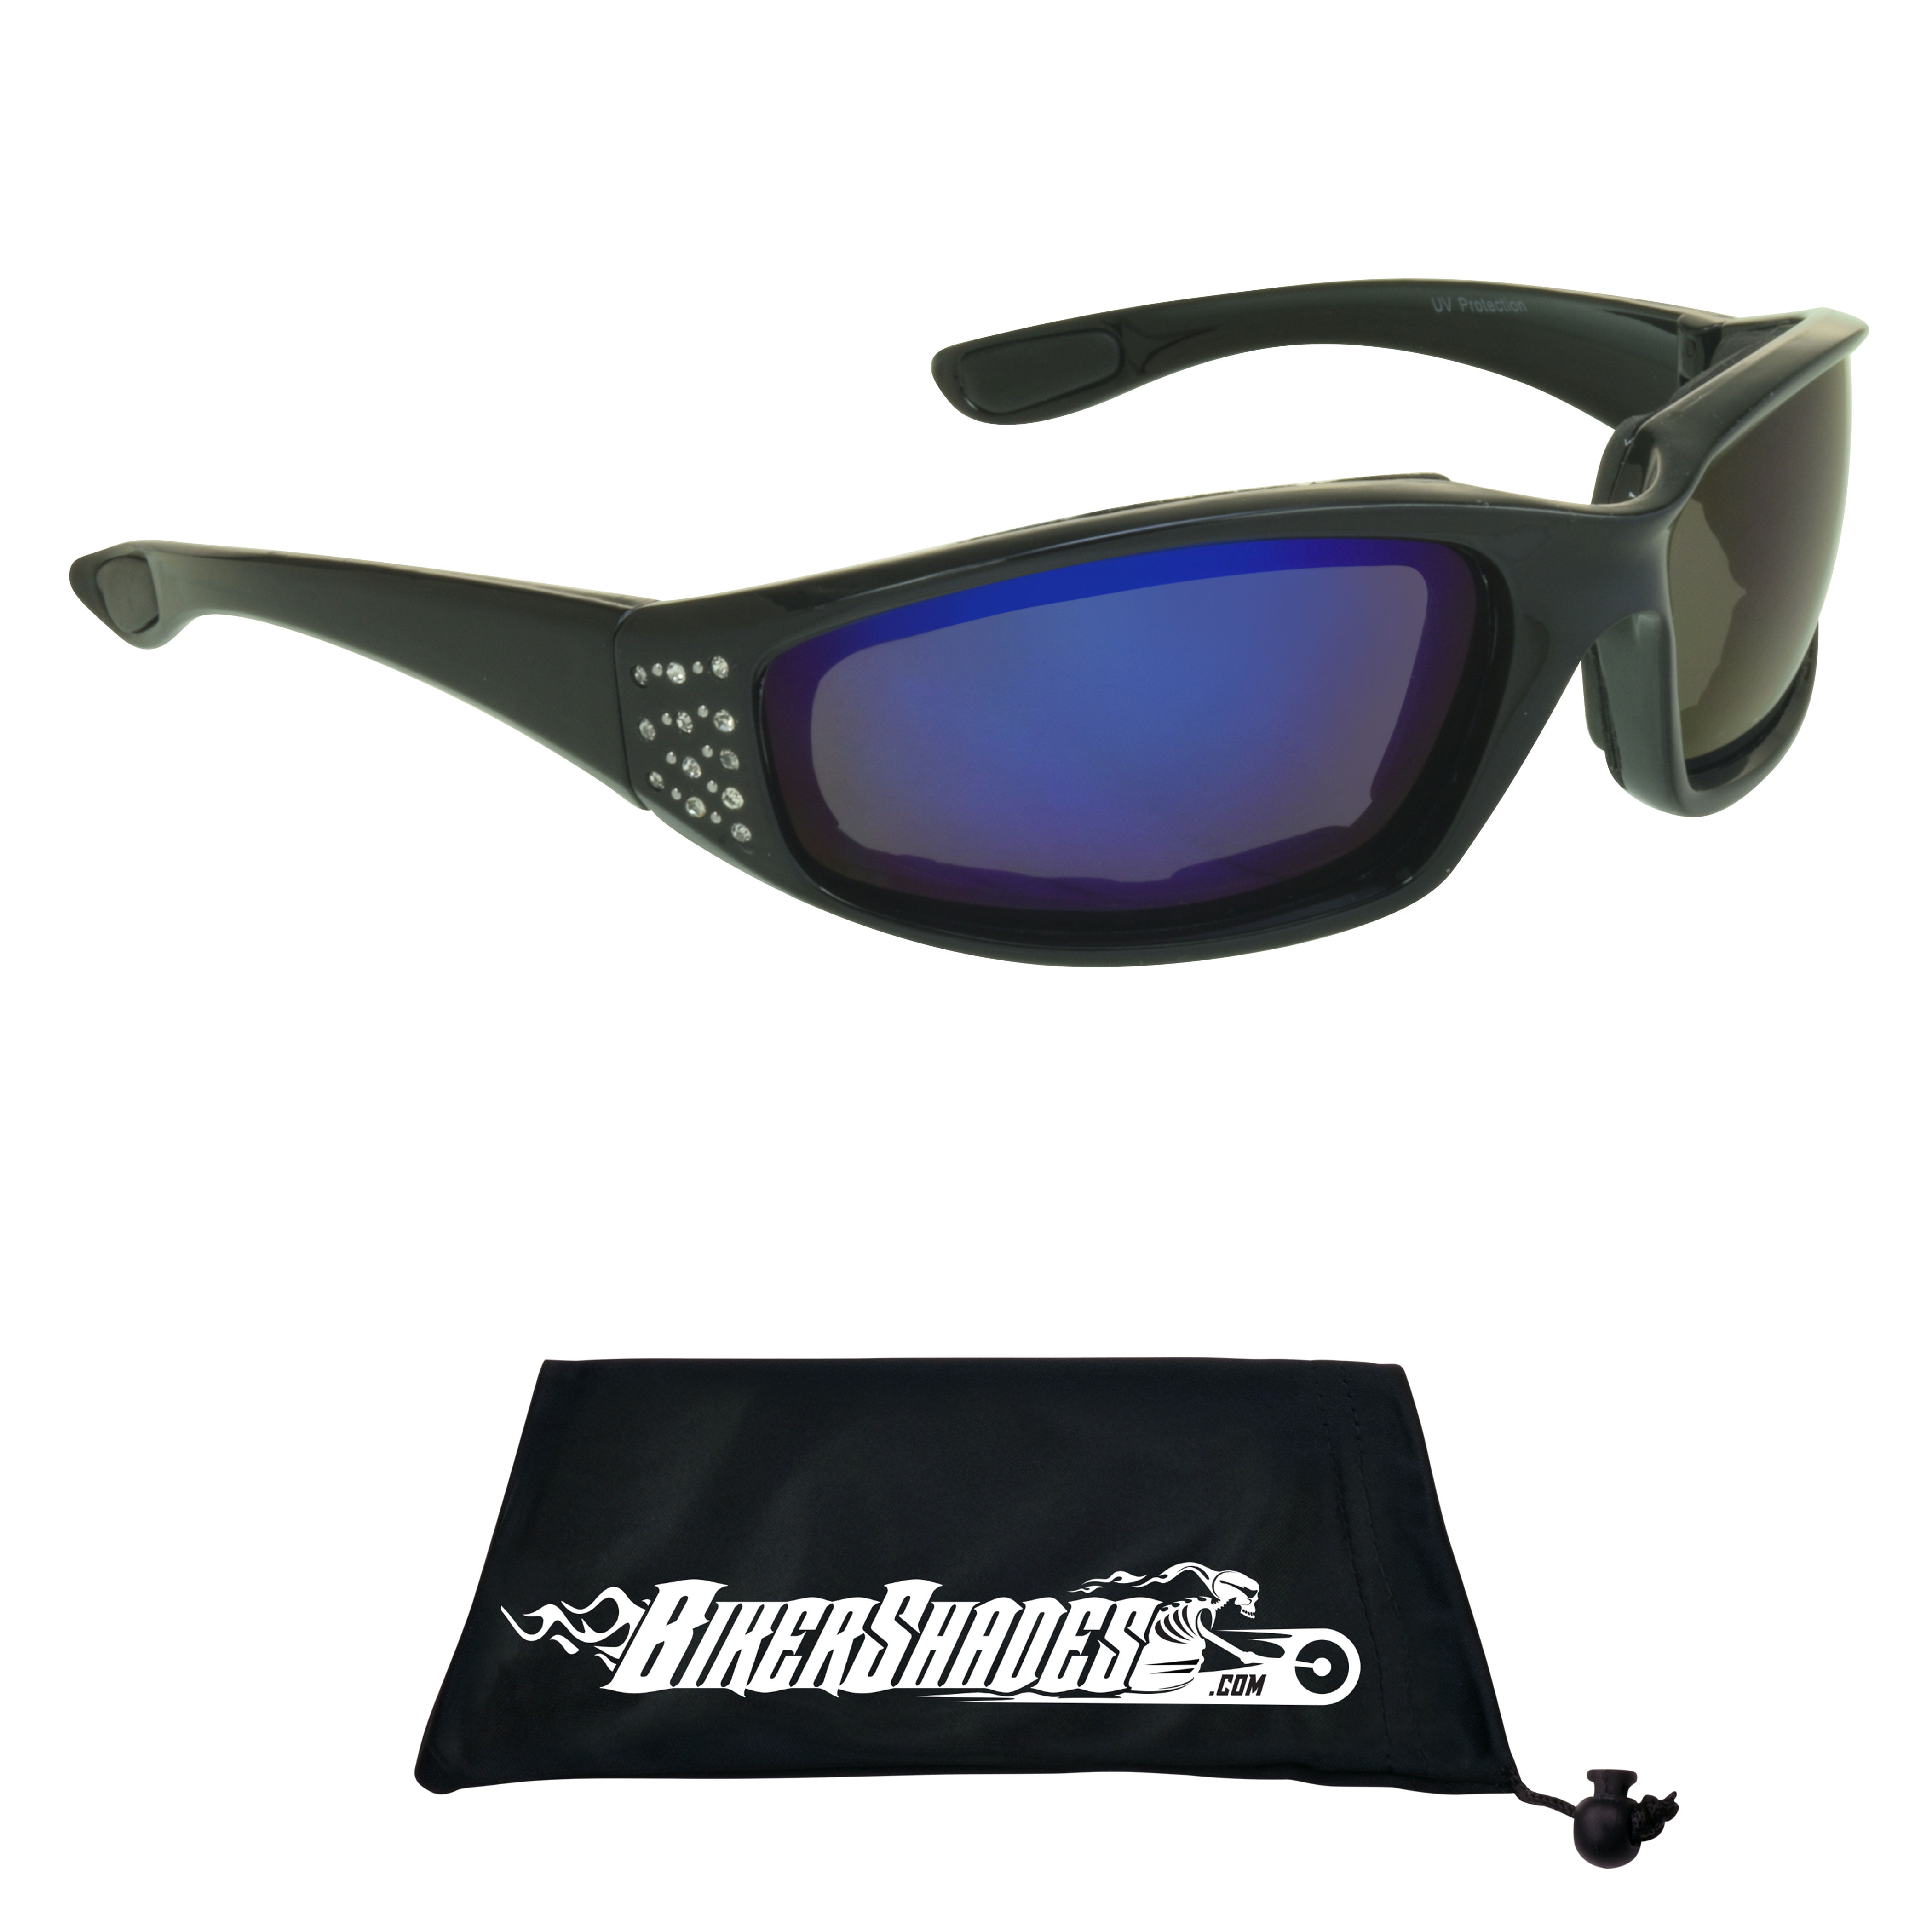 Chrome and Black Frame Anti Glare Mirrored Motorcycle Sunglasses with Rhinestones Foam Padded for Women 